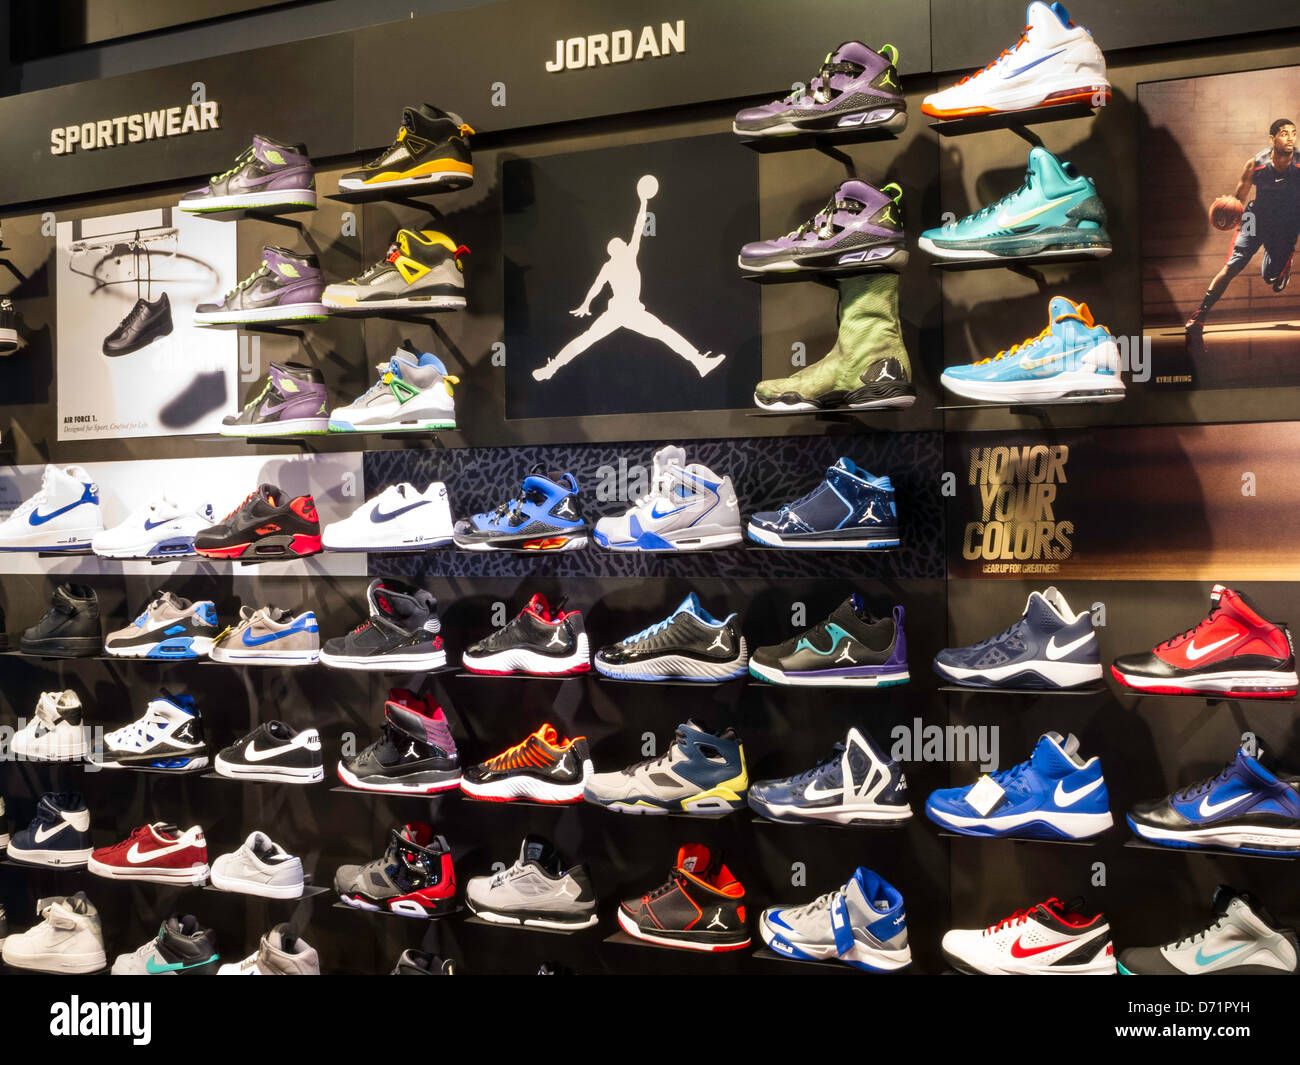 Athletic Footwear Wall, Featuring Nike Shoes   with Swoosh Logo, Modell's Sporting Goods Store Interior, NYC Stock Photo